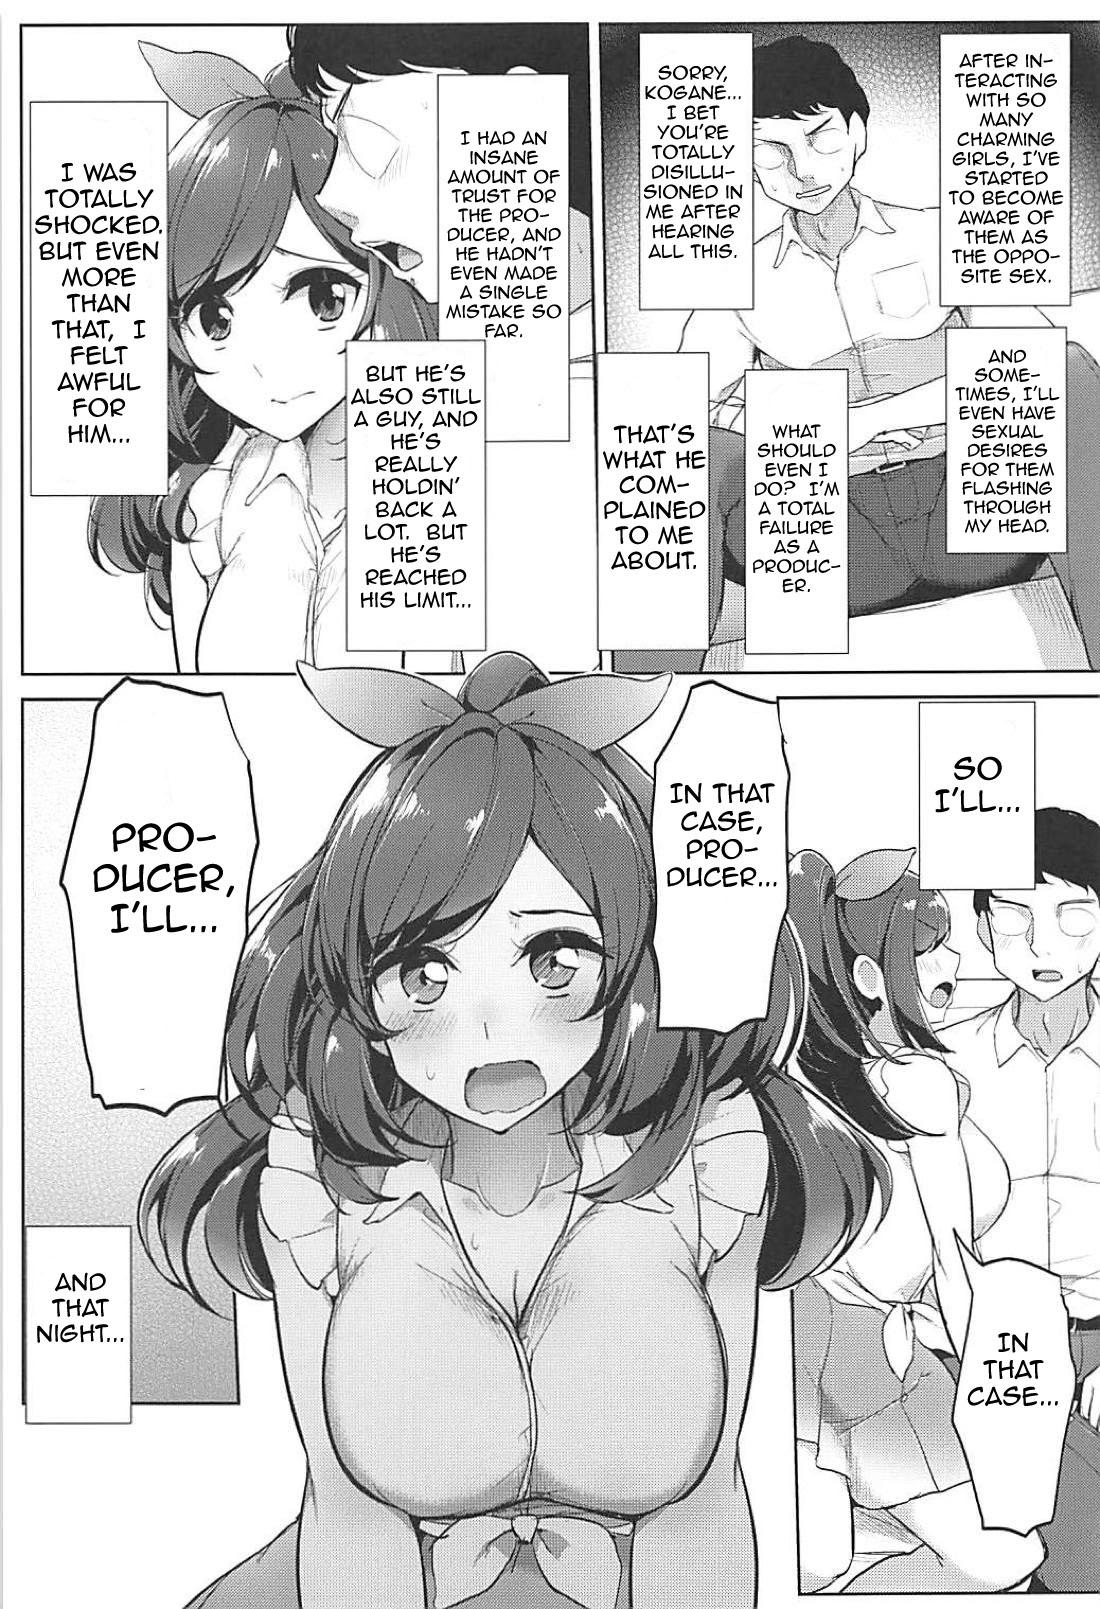 Tease P e no Suki wa Tomeraren bai - When I Just Can't Stop Loving The Producer - The idolmaster Hooker - Page 6